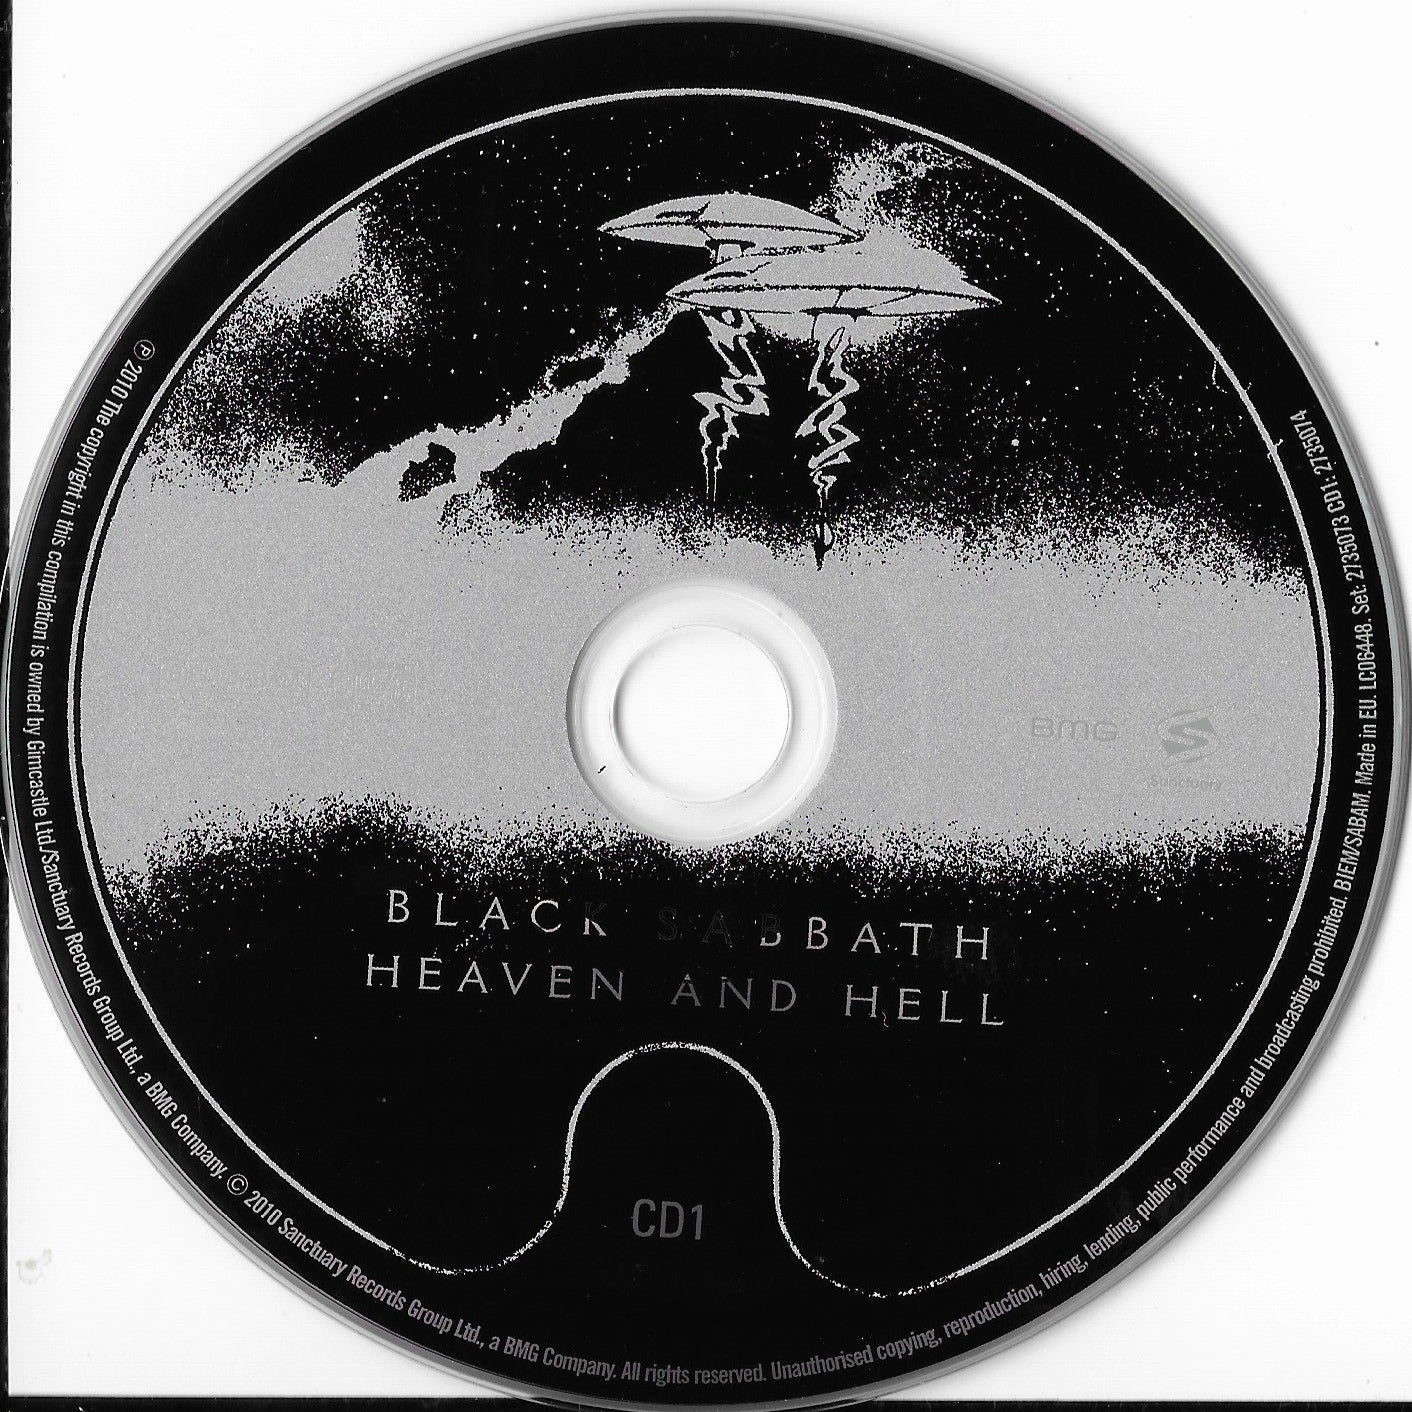 BLACK SABBATH - Heaven And Hell (Deluxe Expanded Version Digipack)